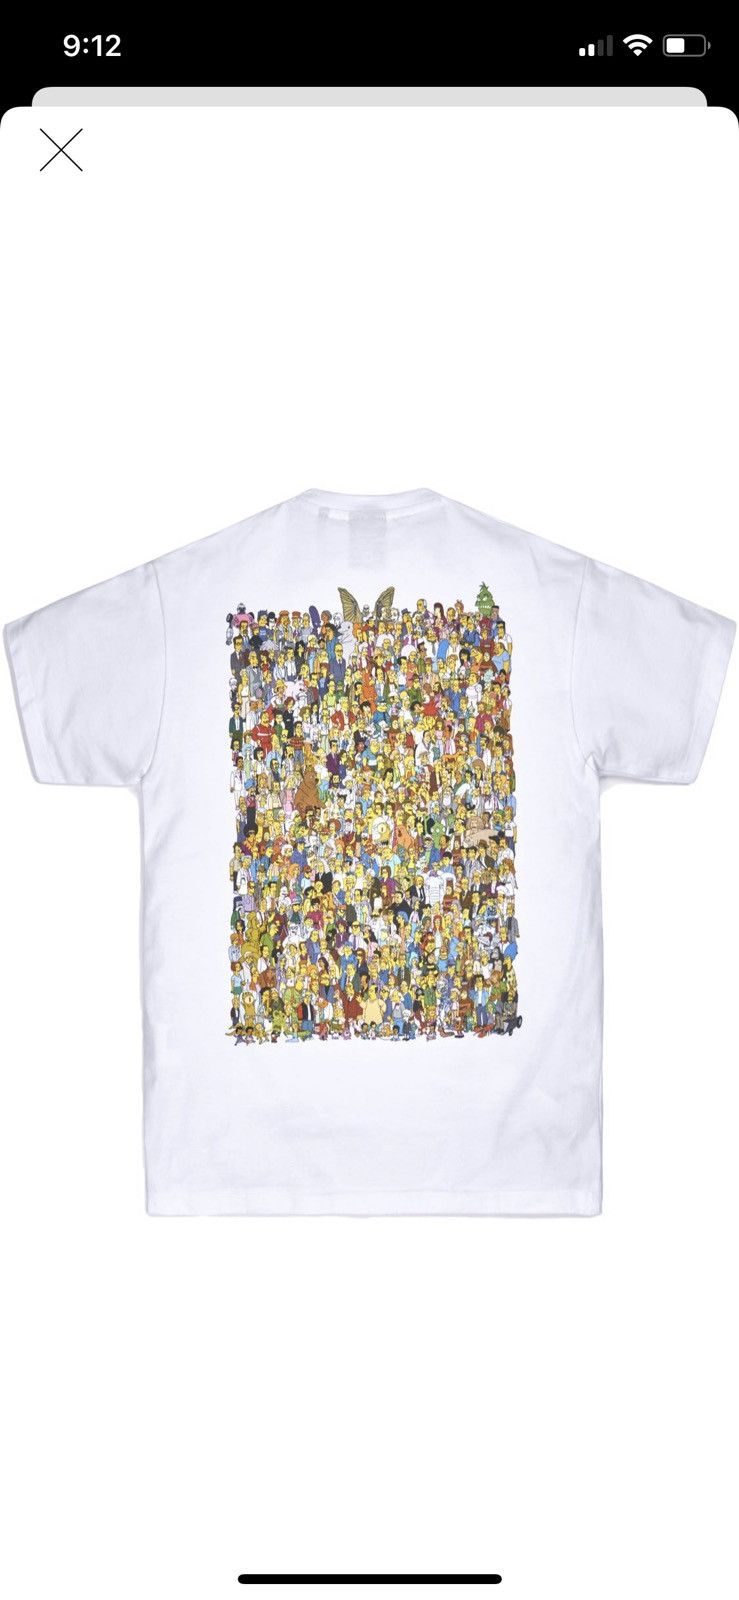 Kith KITH X SIMPSONS CAST OF CHARACTERS TEE | Grailed